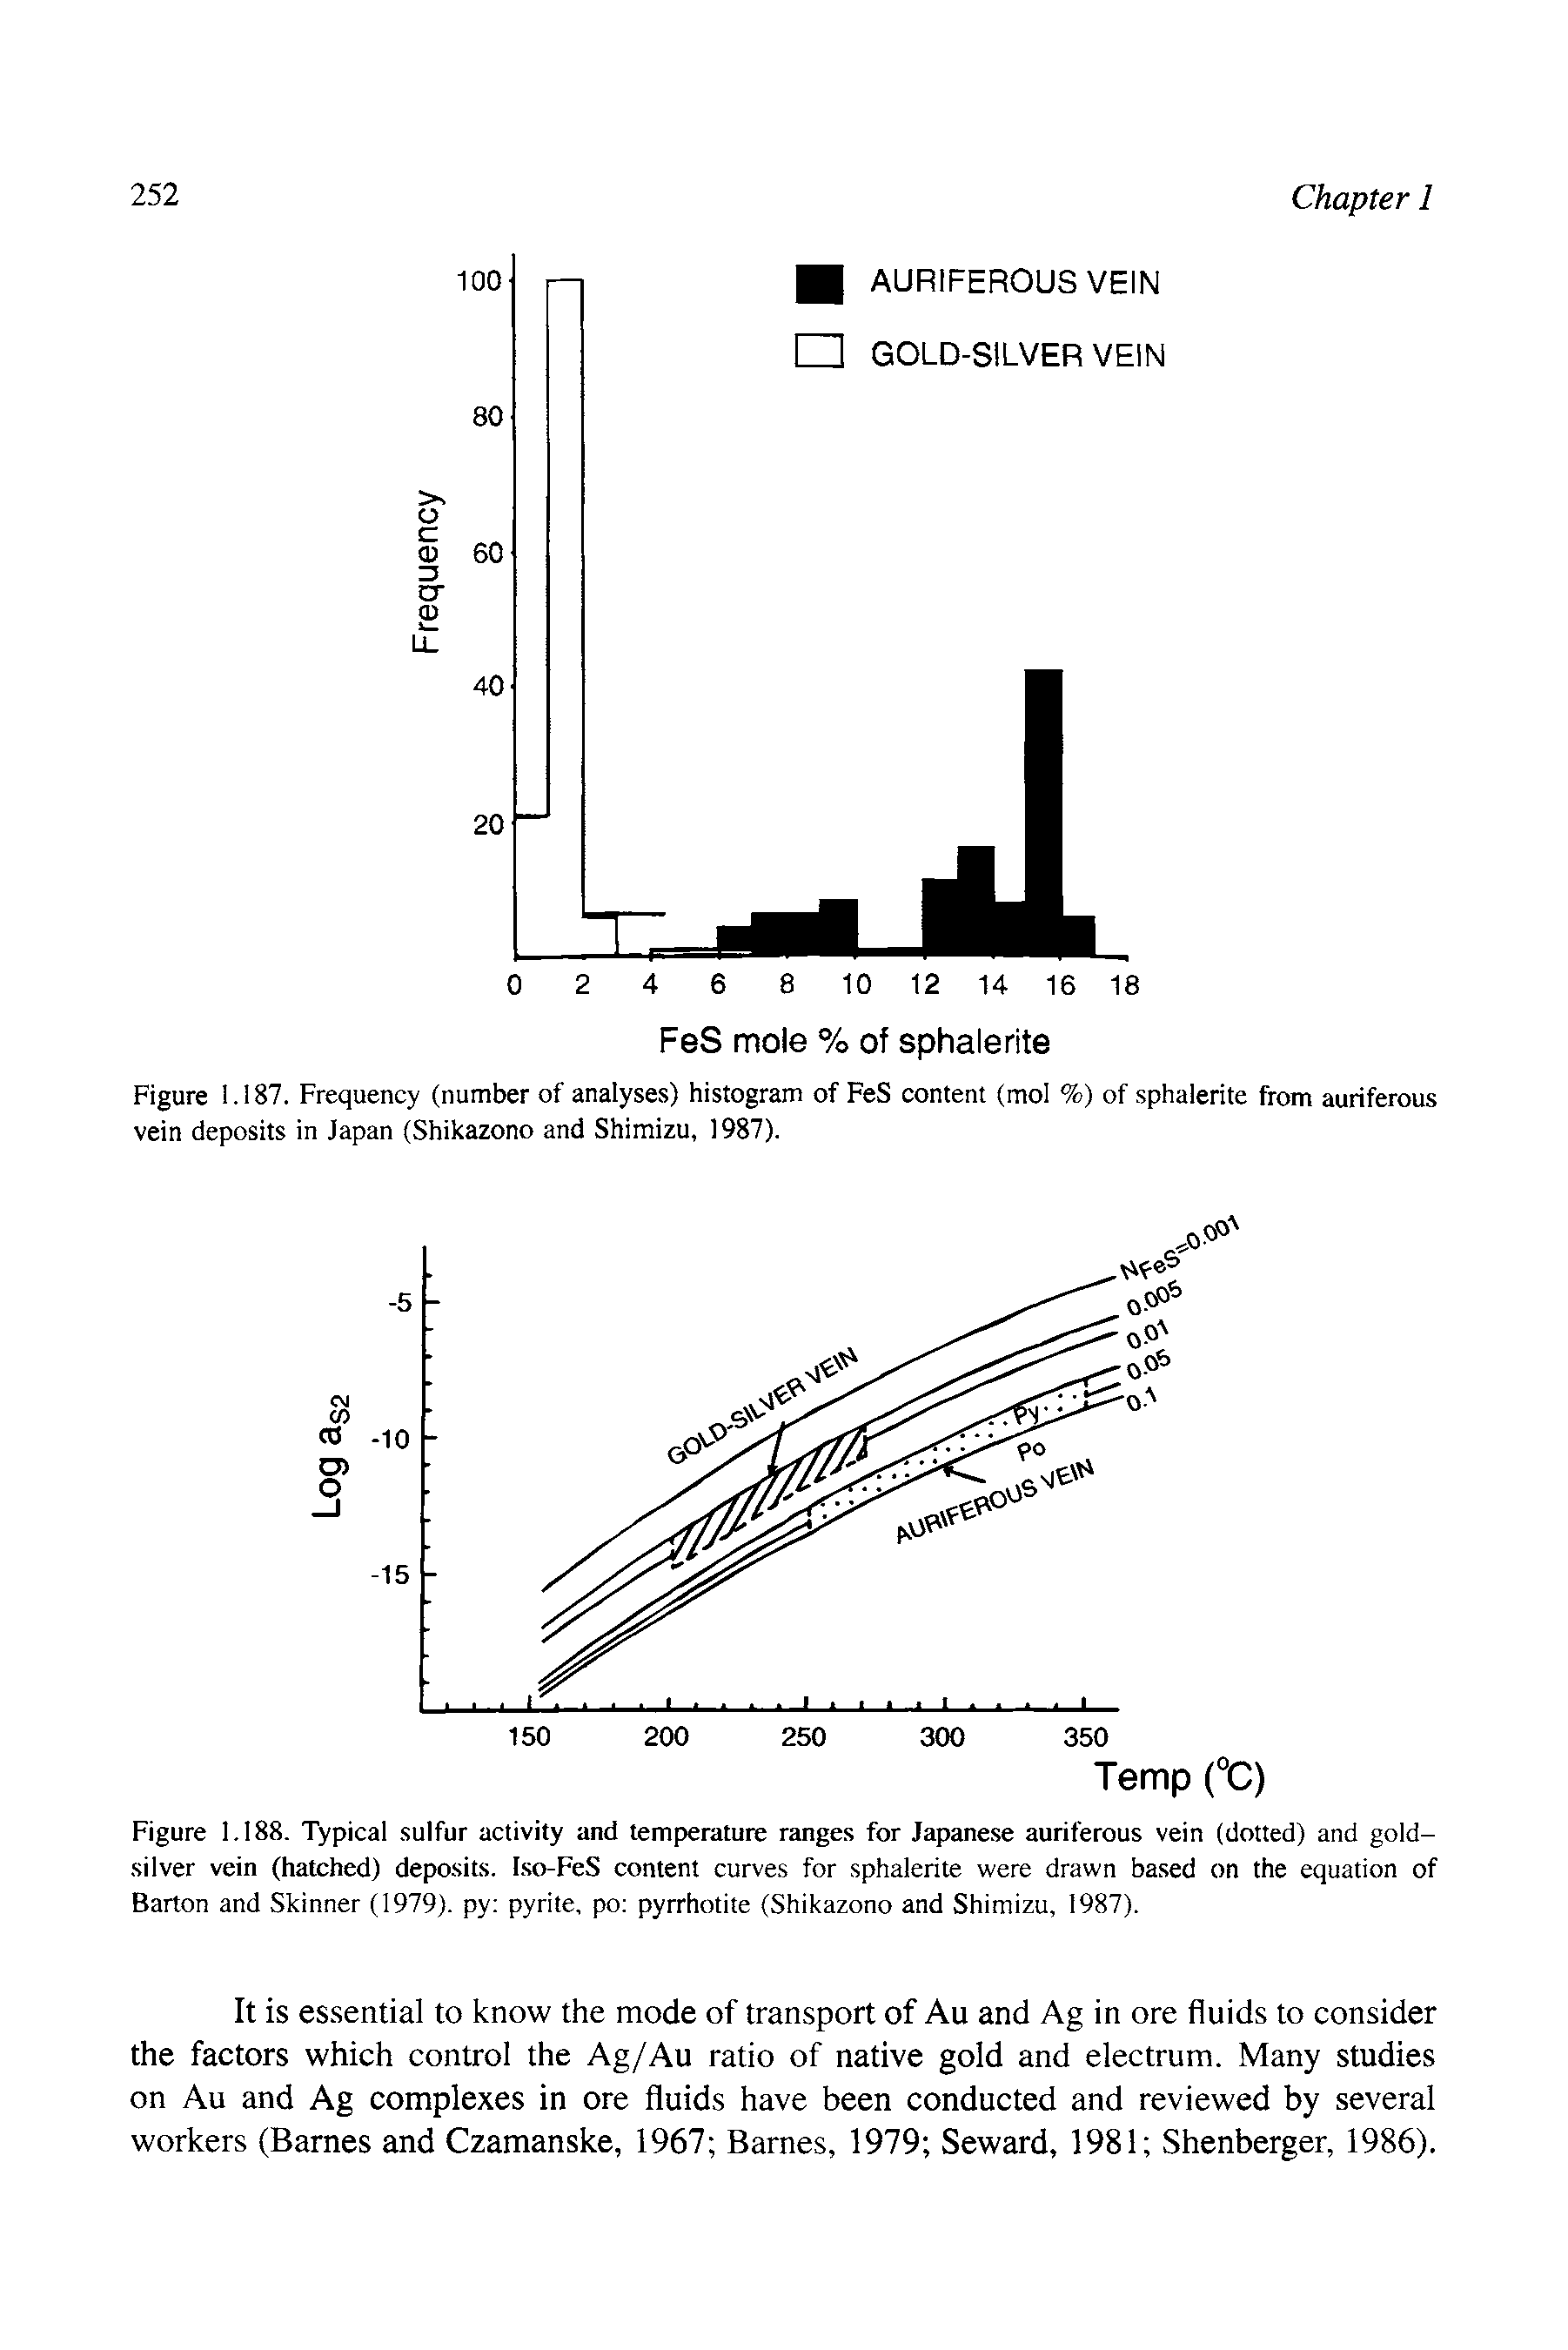 Figure 1,188. Typical sulfur activity and temperature ranges for Japanese auriferous vein (dotted) and gold-silver vein (hatched) deposits. I.so-FeS content curves for sphalerite were drawn based on the equation of Barton and Skinner (1979). py pyrite, po pyrrhotite (Shikazono and Shimizu, 1987).